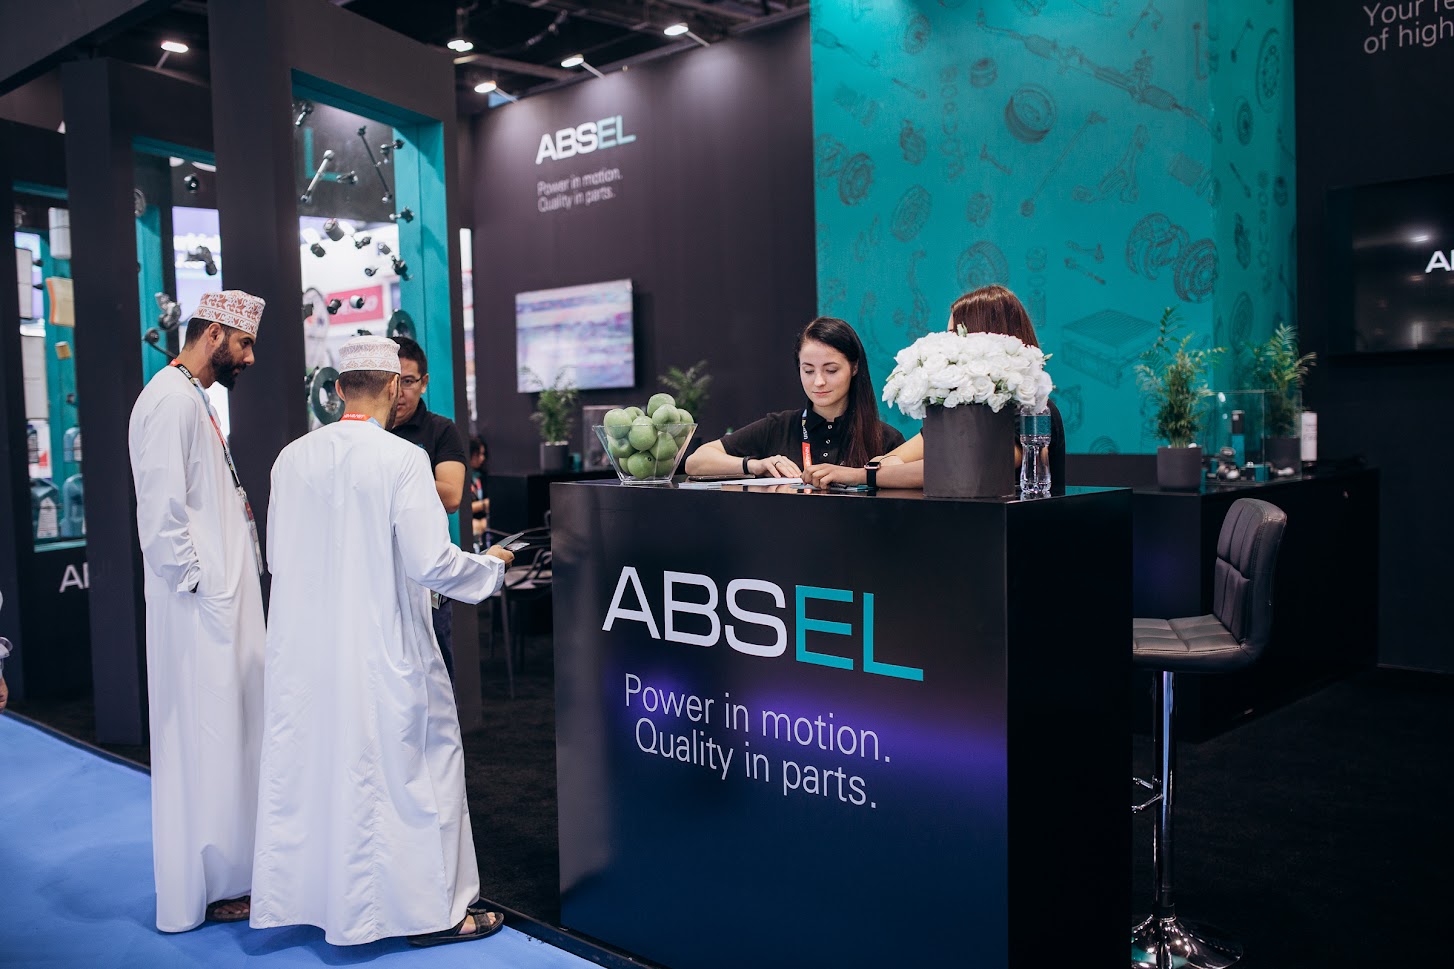 ABSEL auto parts were successfully presented at the exhibition in Dubai